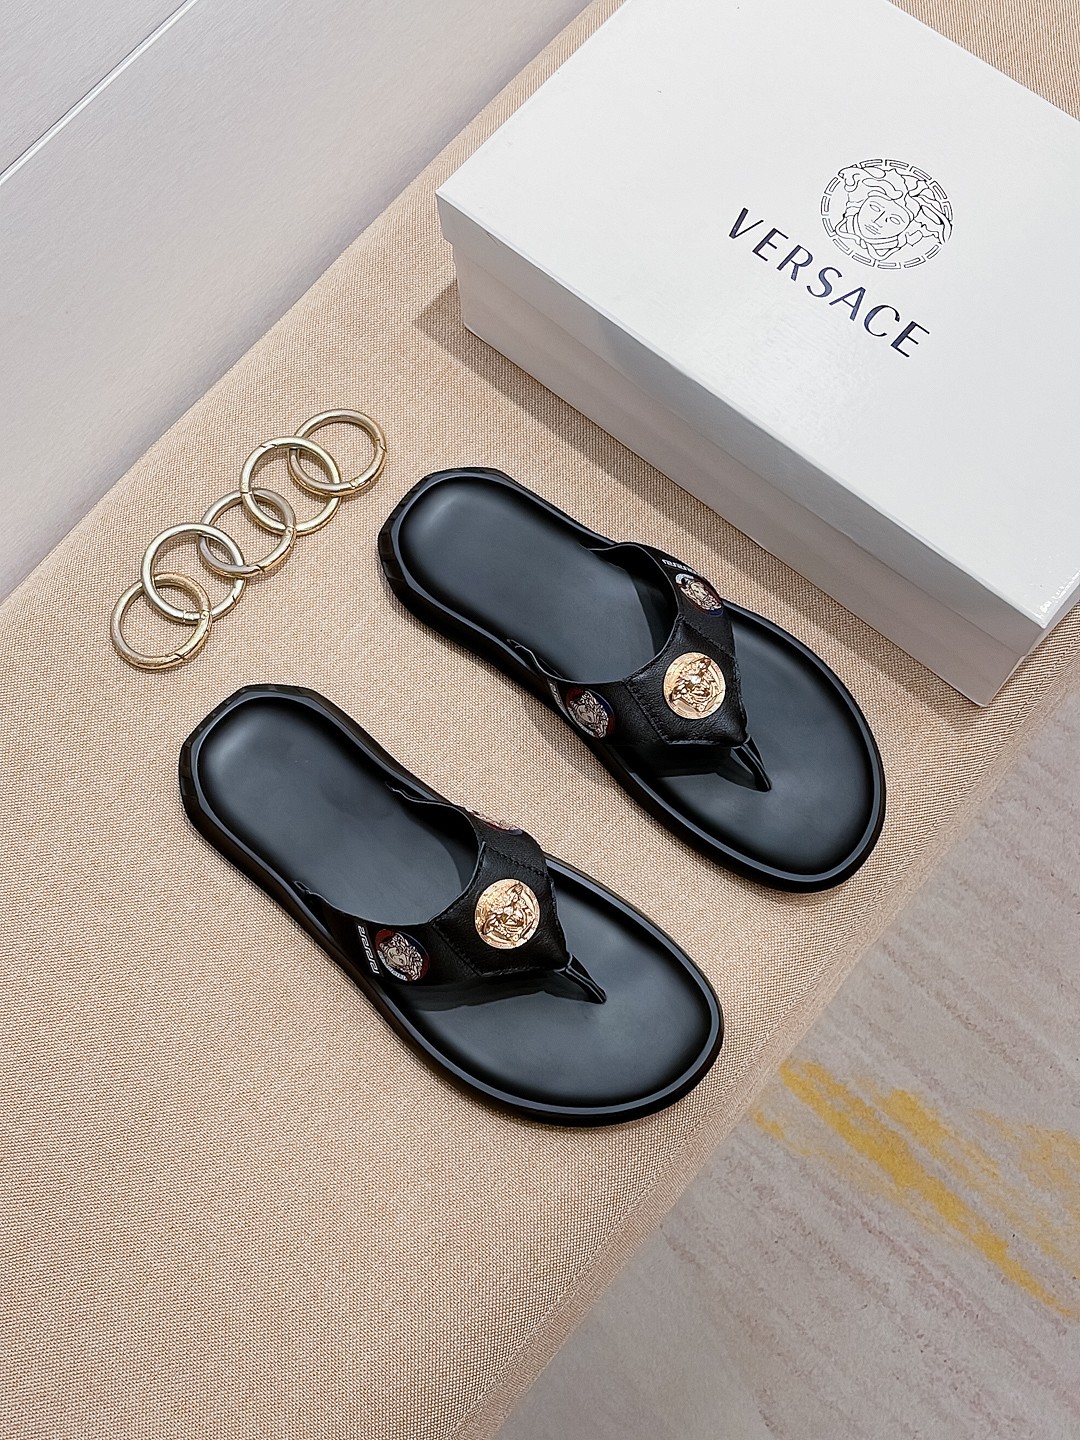 Versace Shoes Slippers Replica Sale online
 Cowhide Rubber Fashion Casual